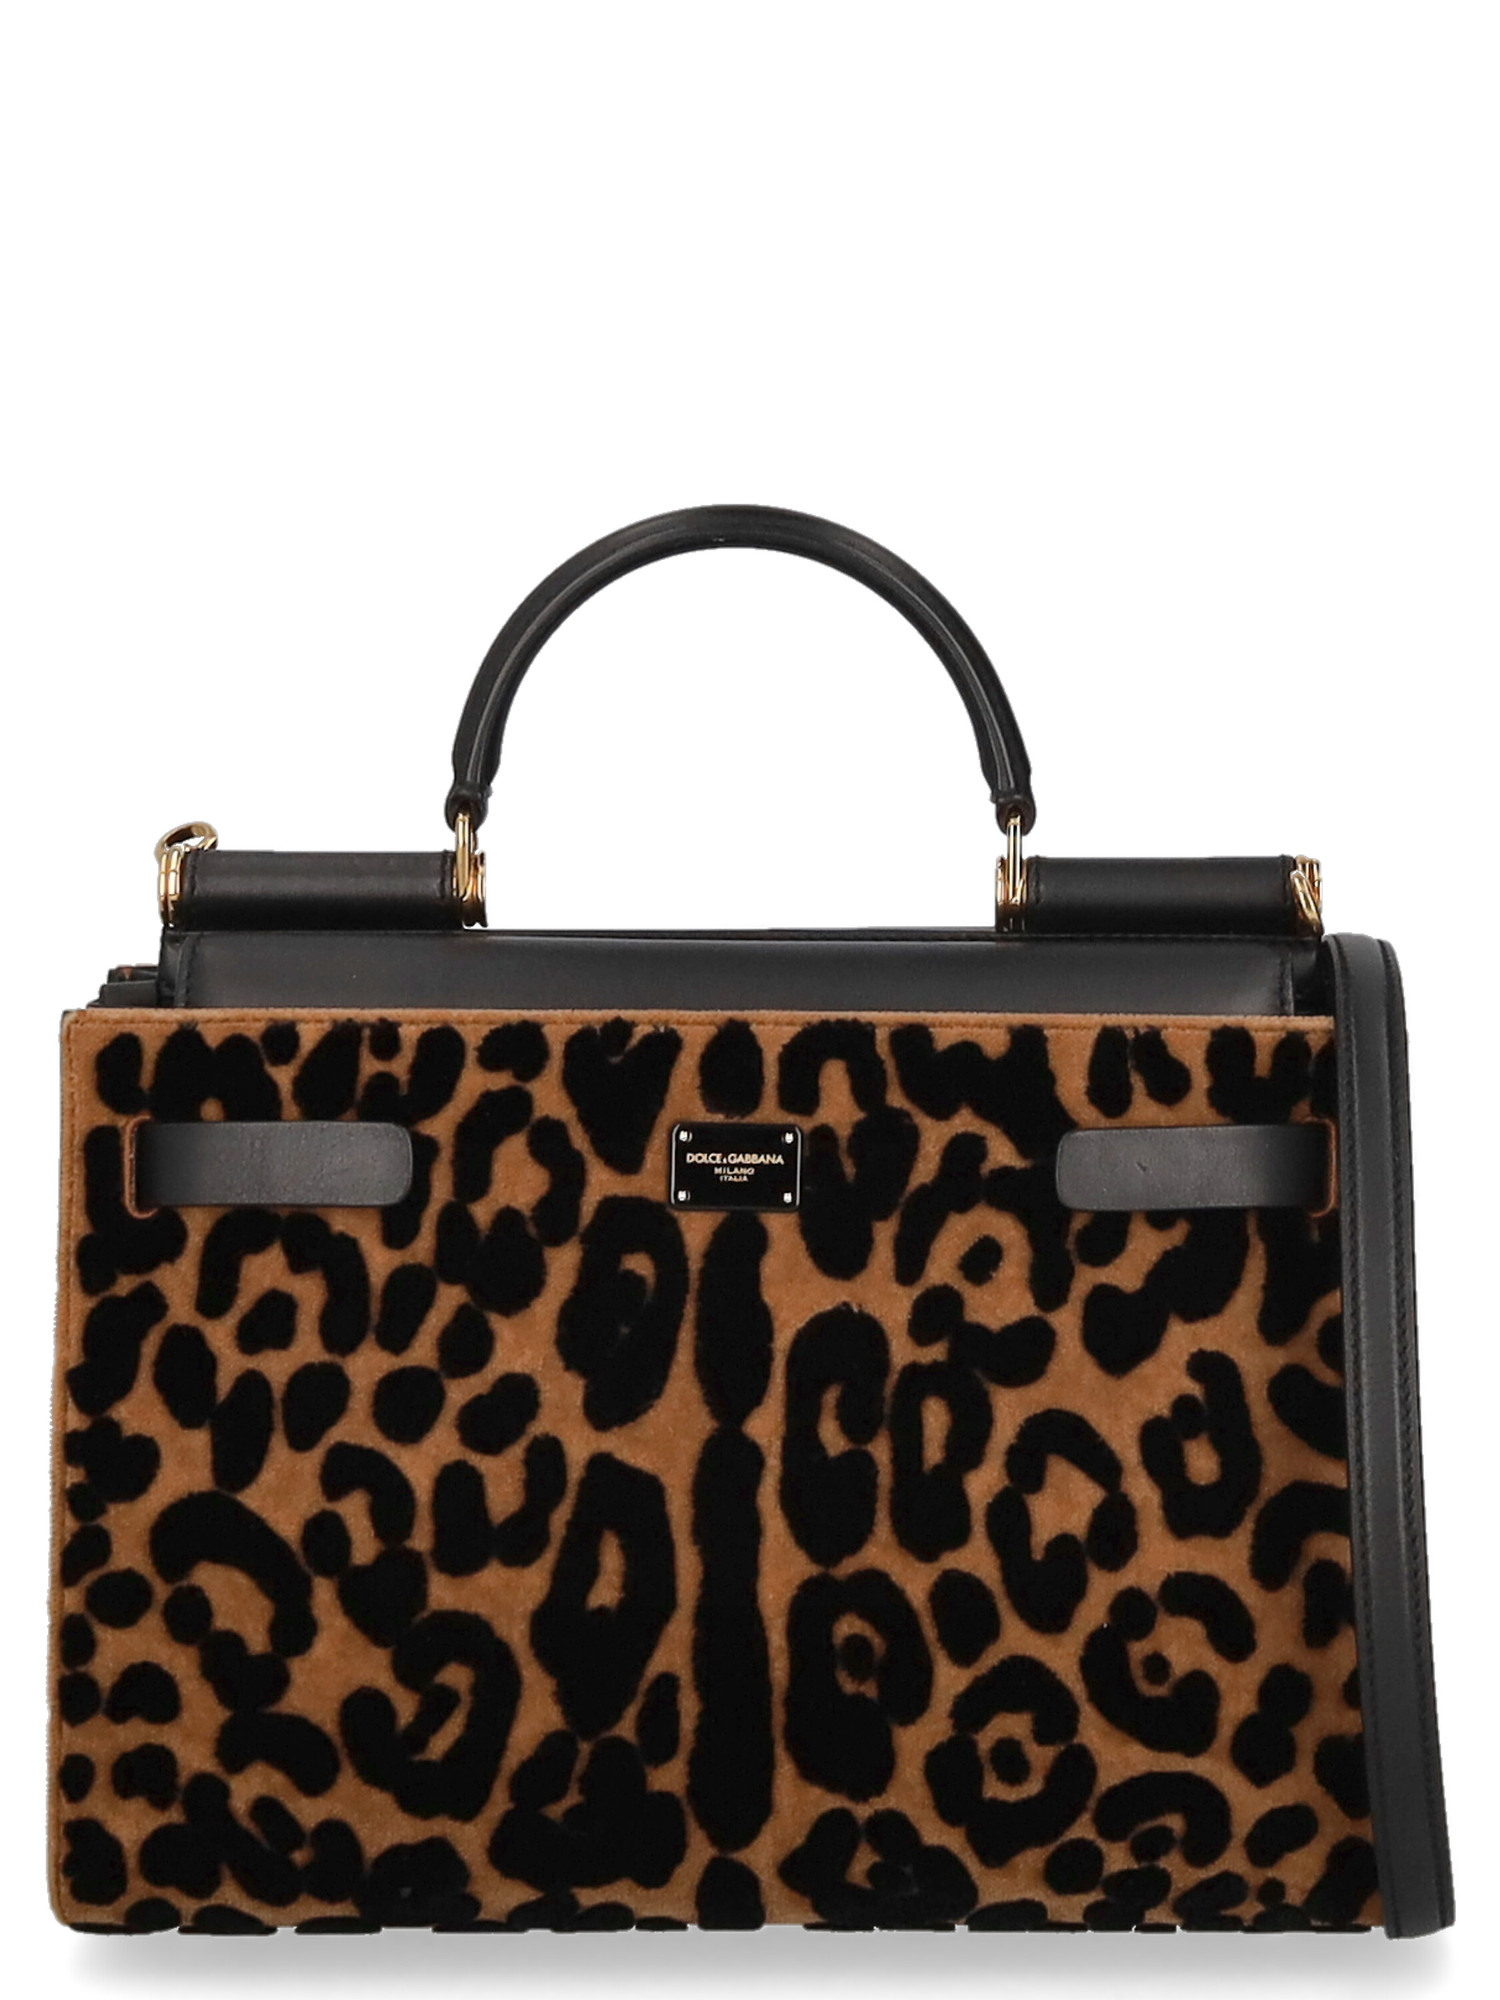 Condition: Excellent, Animal Print Synthetic Fibers, Color: Black, Camel Color -  -  -